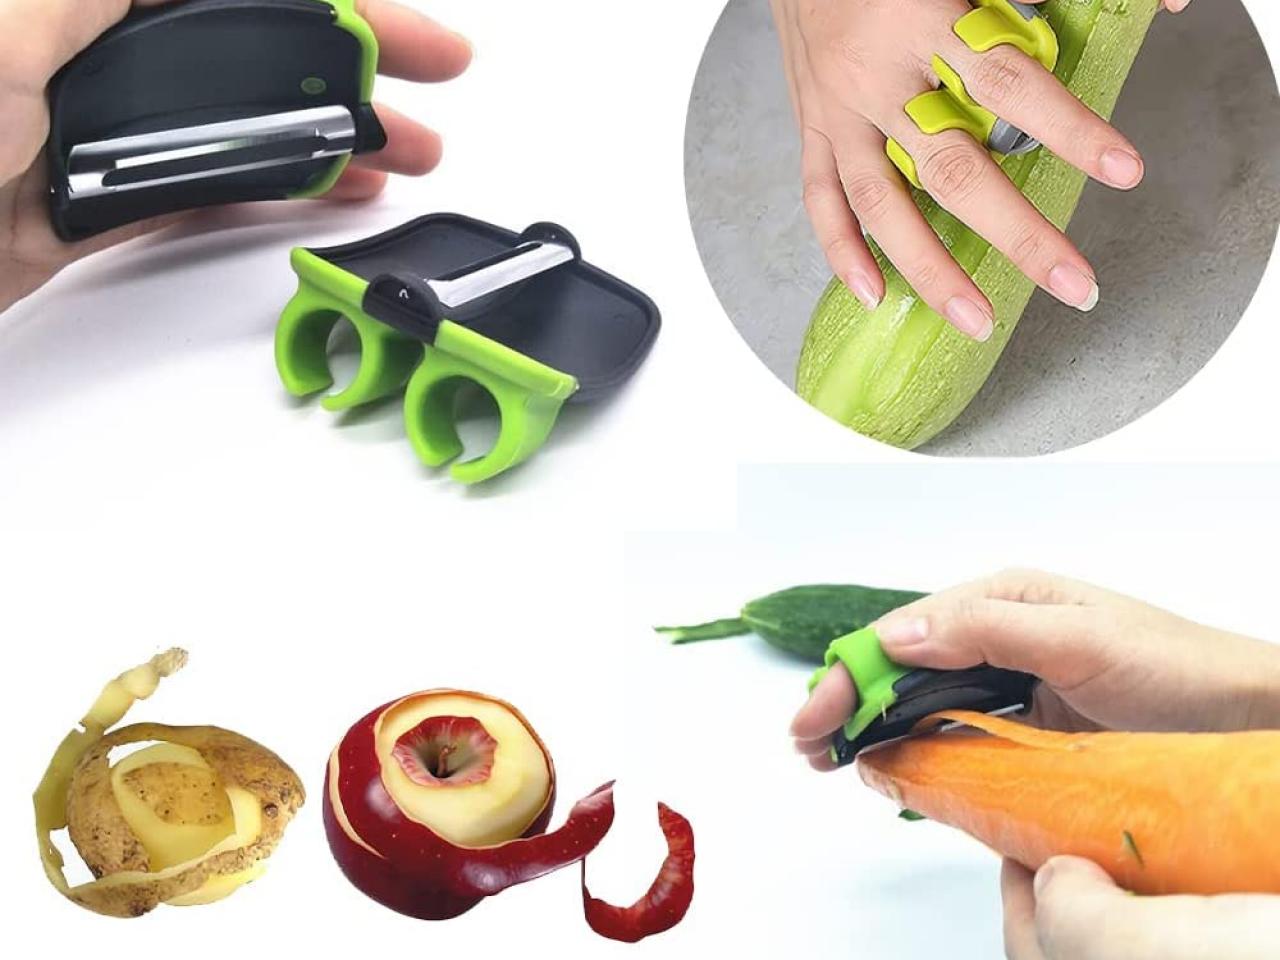 https://food.fnr.sndimg.com/content/dam/images/food/products/2023/1/20/rx_silicone-finger-grips-peeler.jpeg.rend.hgtvcom.1280.960.suffix/1674242205349.jpeg